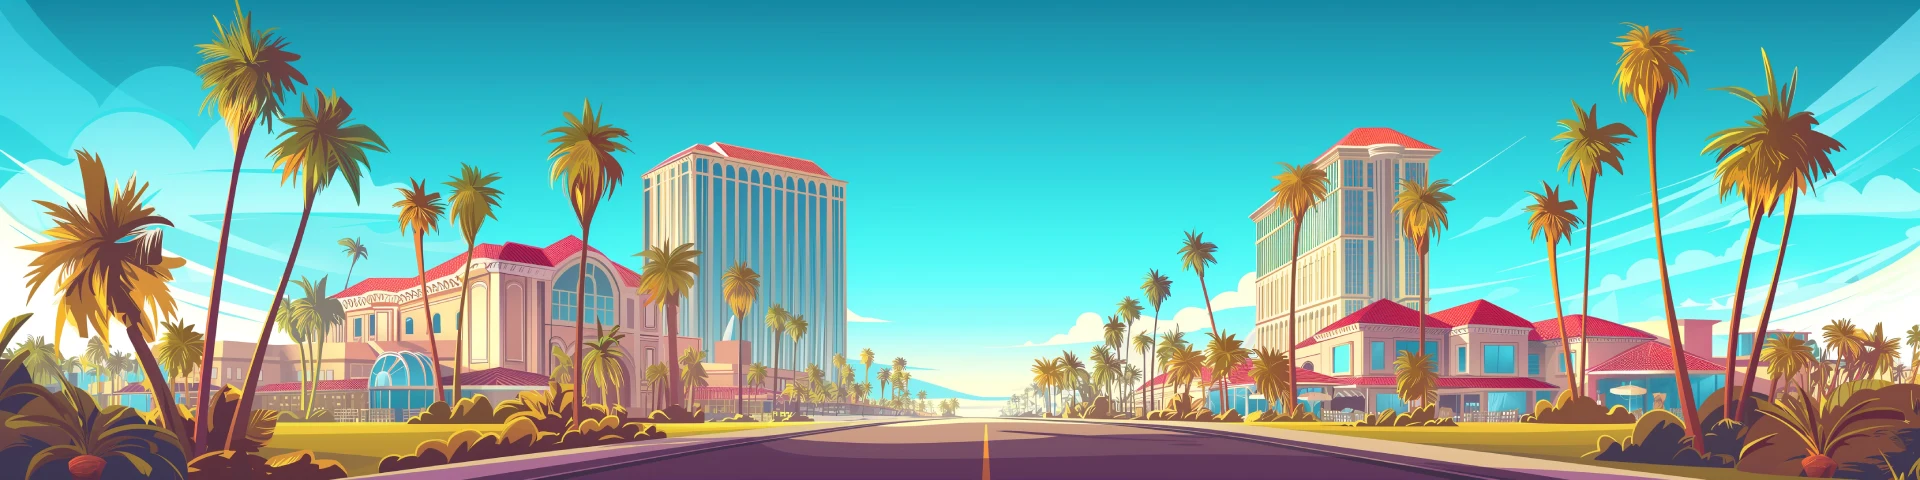 Sunny road with casinos on the side drawn